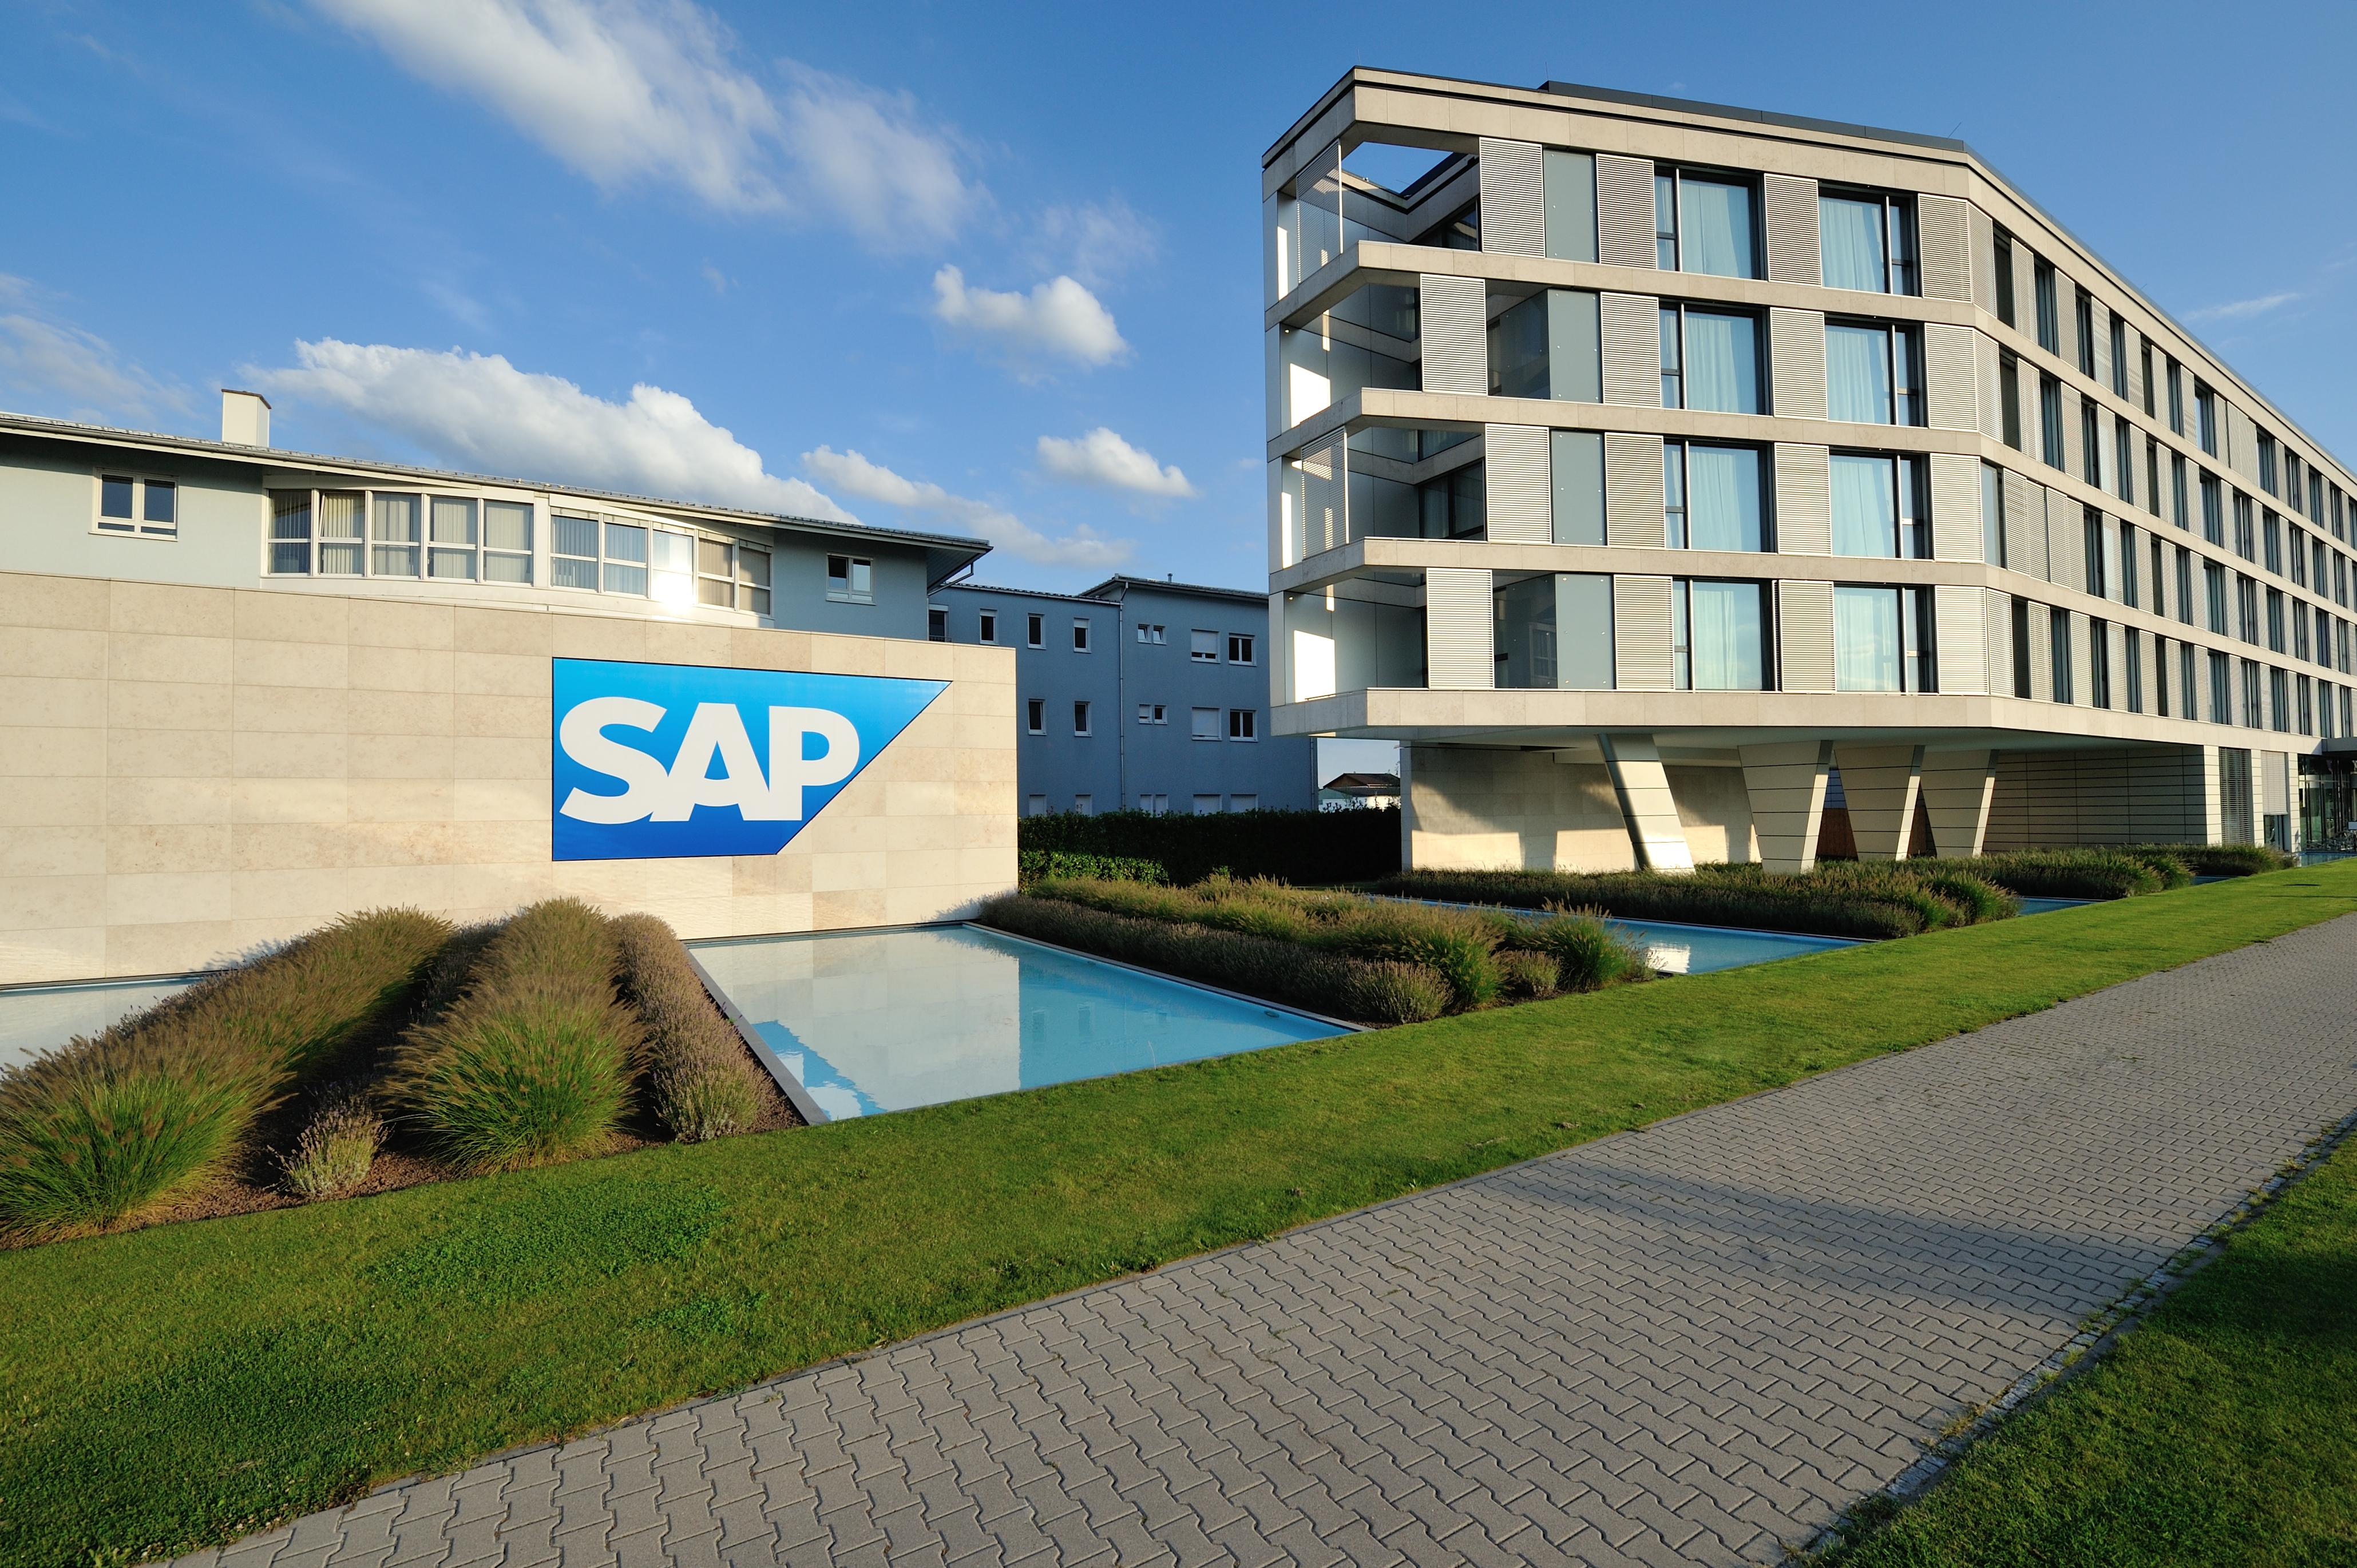 SAP Announces Preliminary Q4 and Full-Year 2021 Results